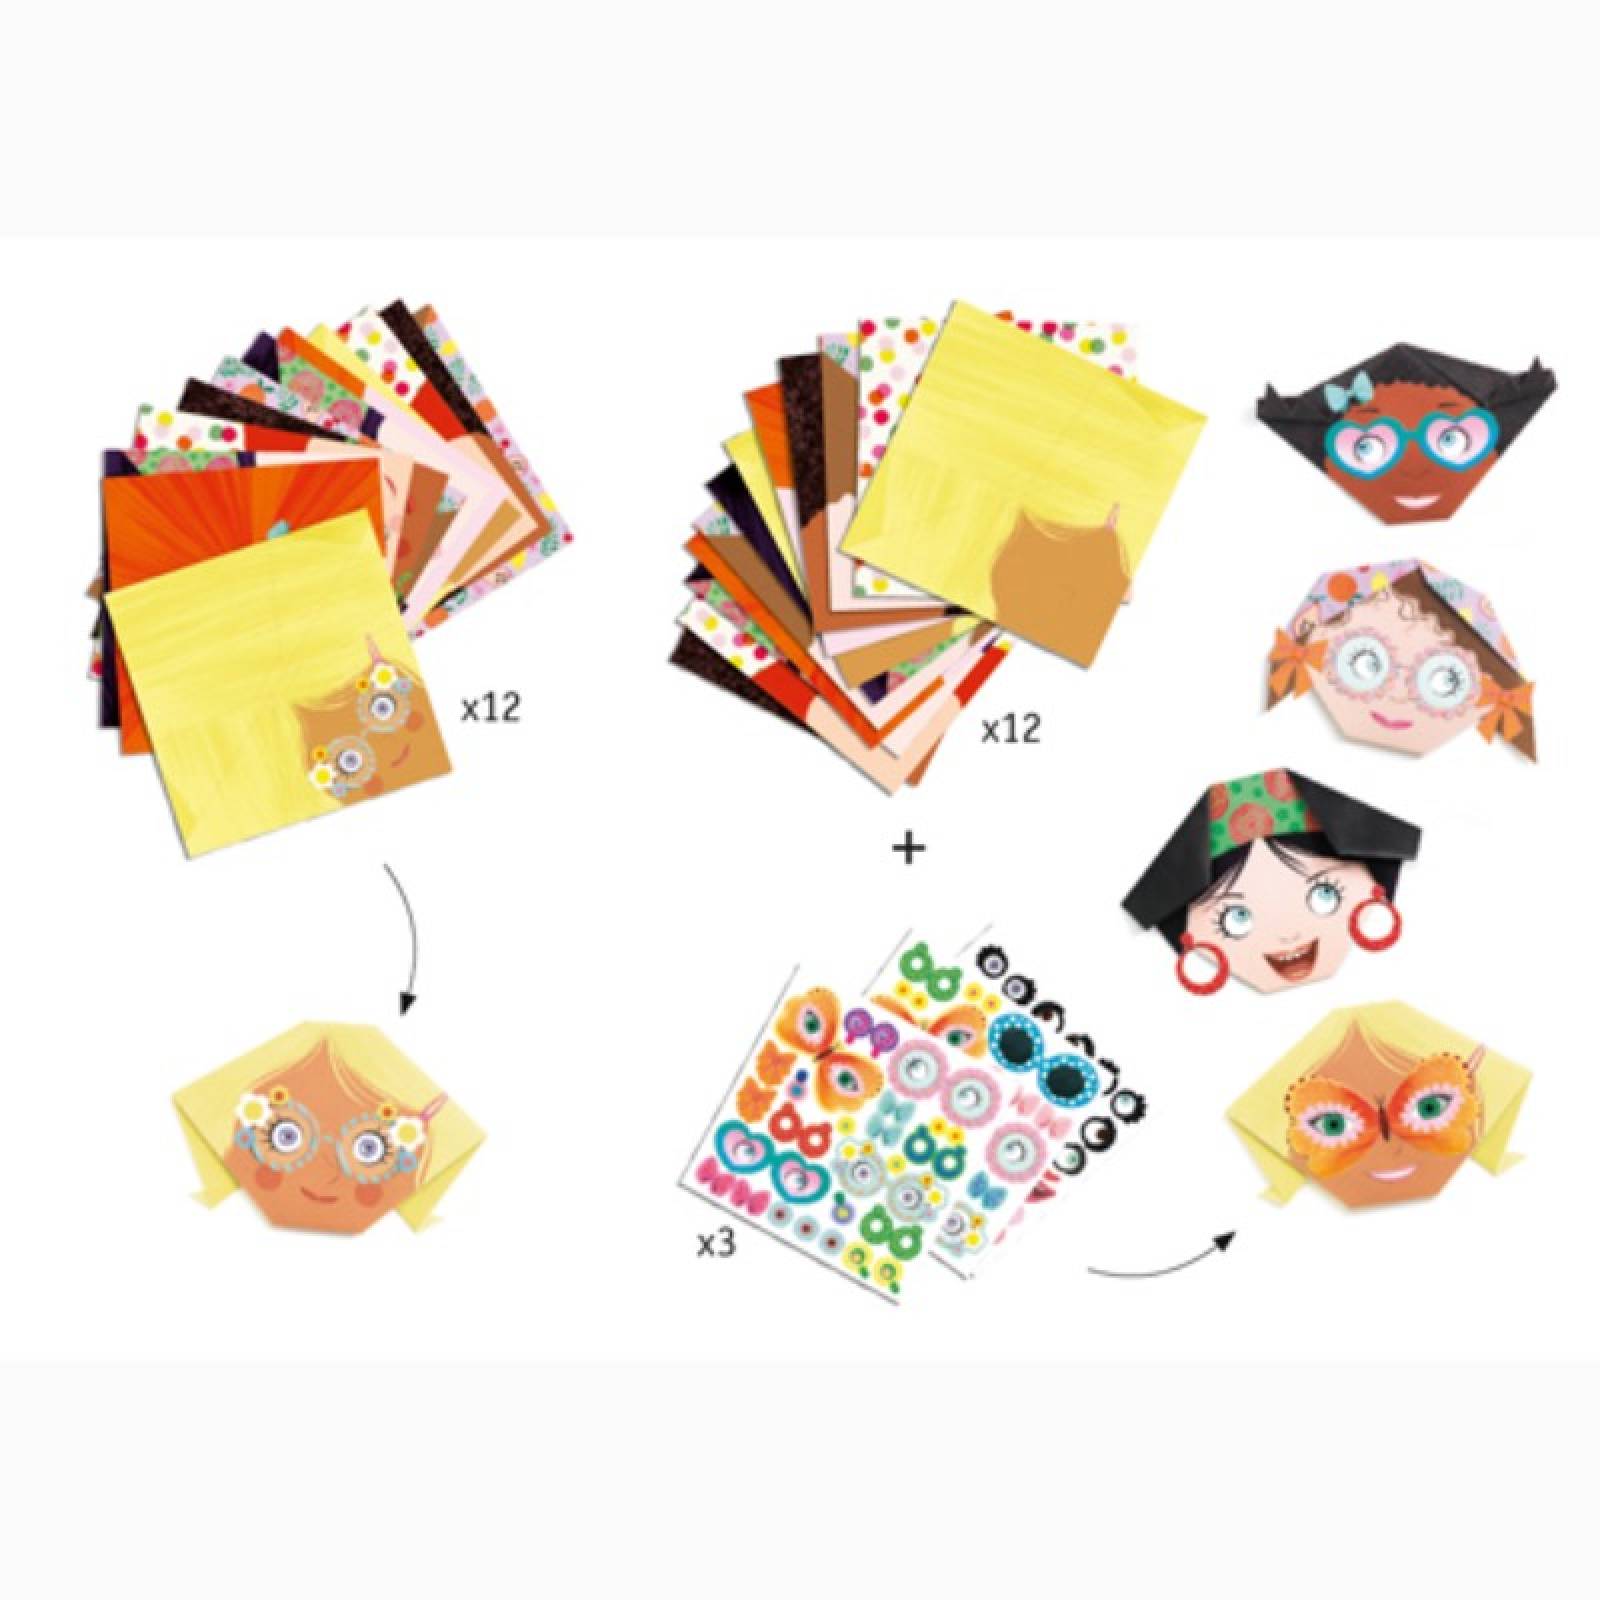 Pretty Faces Origami Craft Set By Djeco 4+ thumbnails